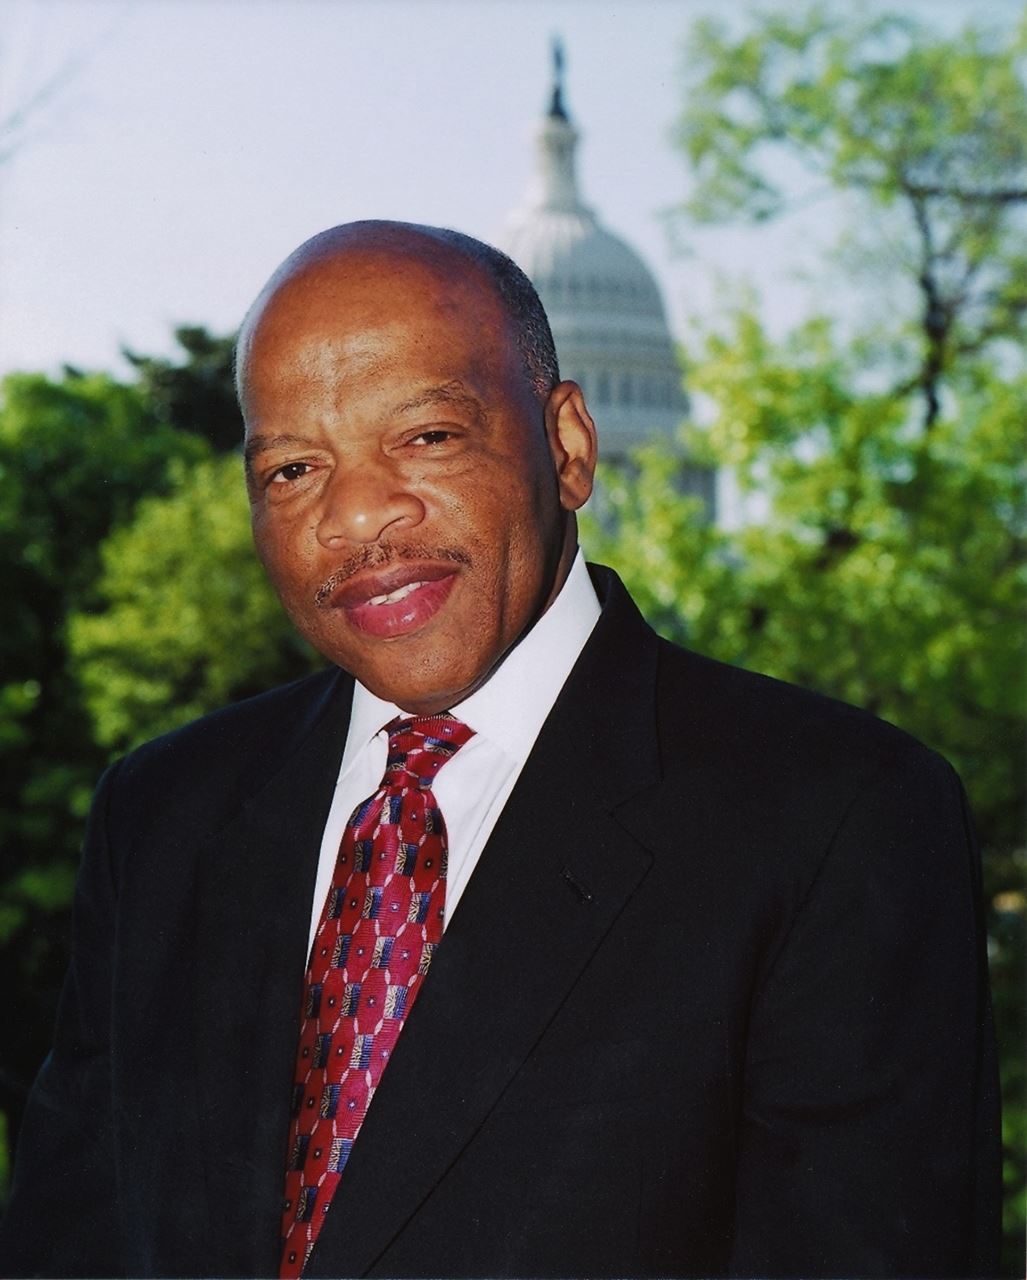 Picture of John Lewis